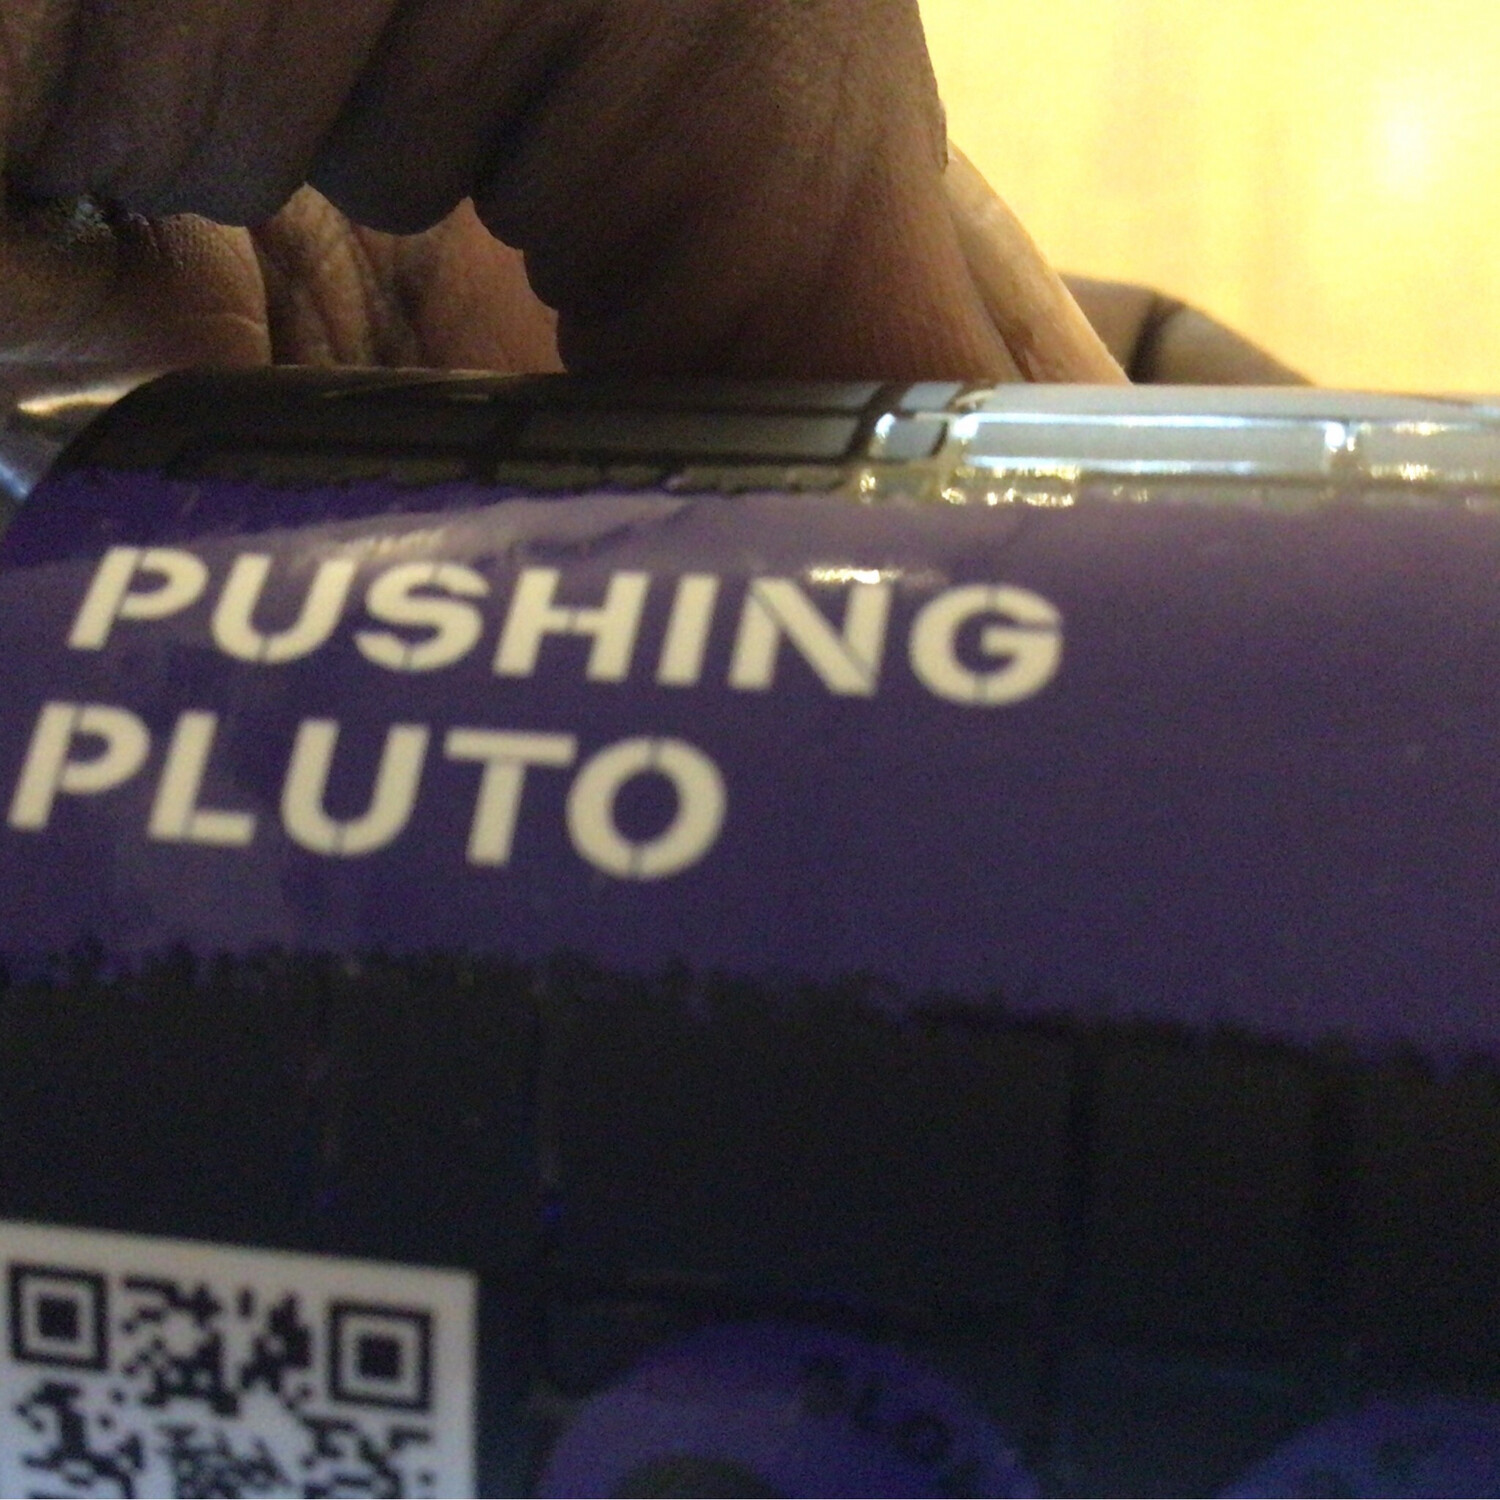 To The Moon Pushing Pluto